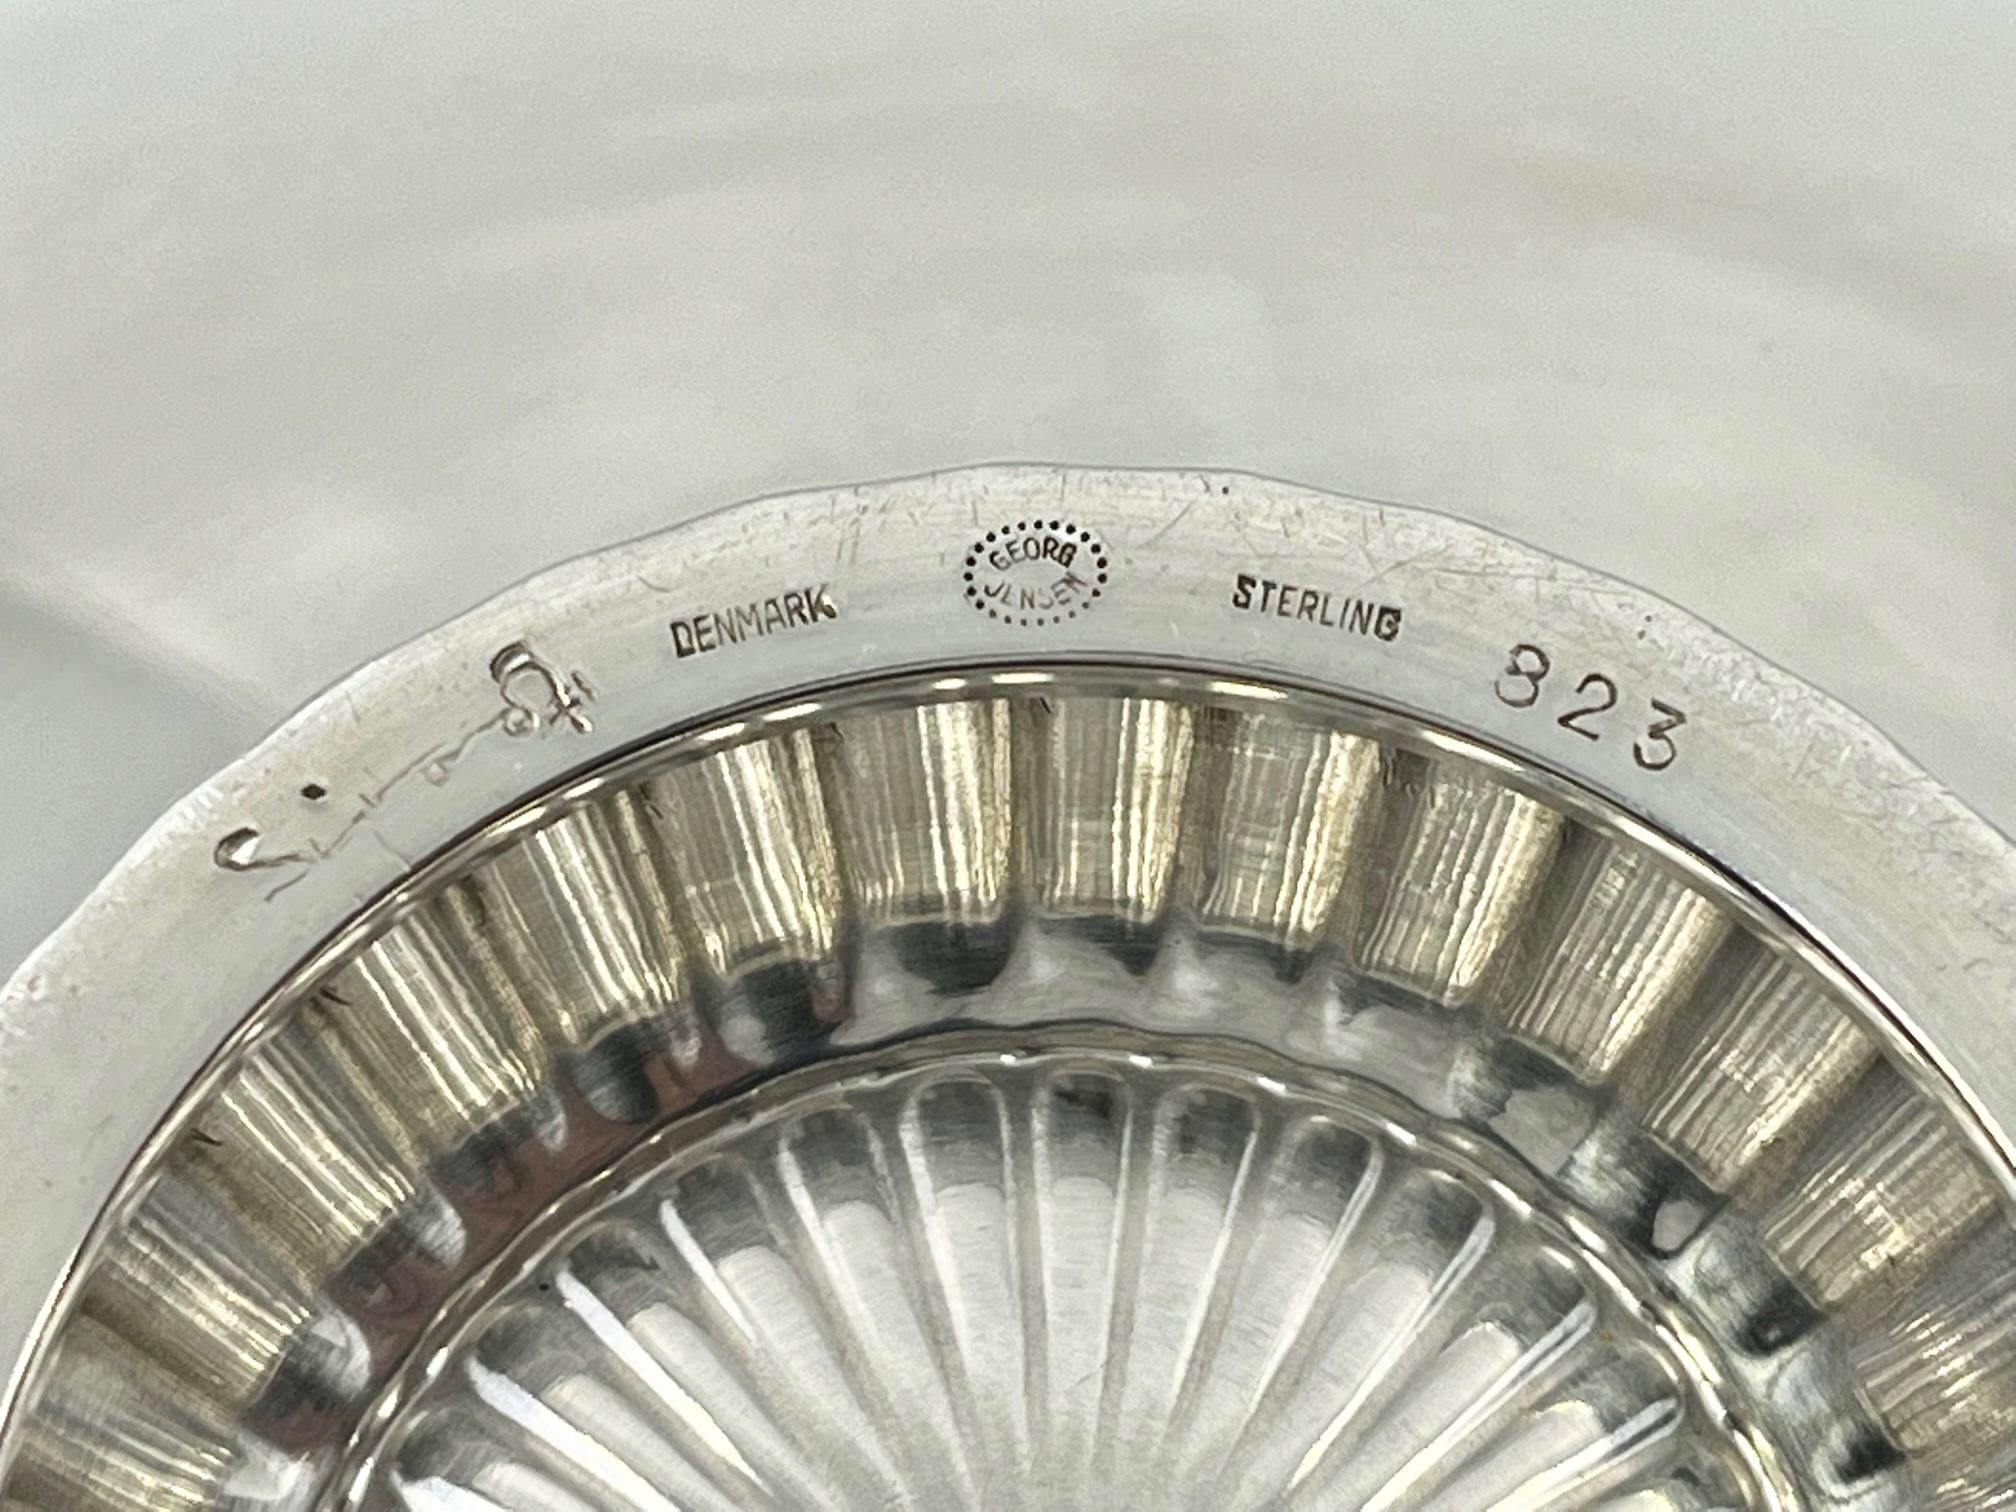 A sterling silver Georg Jensen Art Deco bowl, design #823 by Sigvard Bernadotte from 1938. A plain bowl standing on a small crimped foot, inside the bowl is a round hand-chased japanesque motif.

Additional information:
Material: Sterling